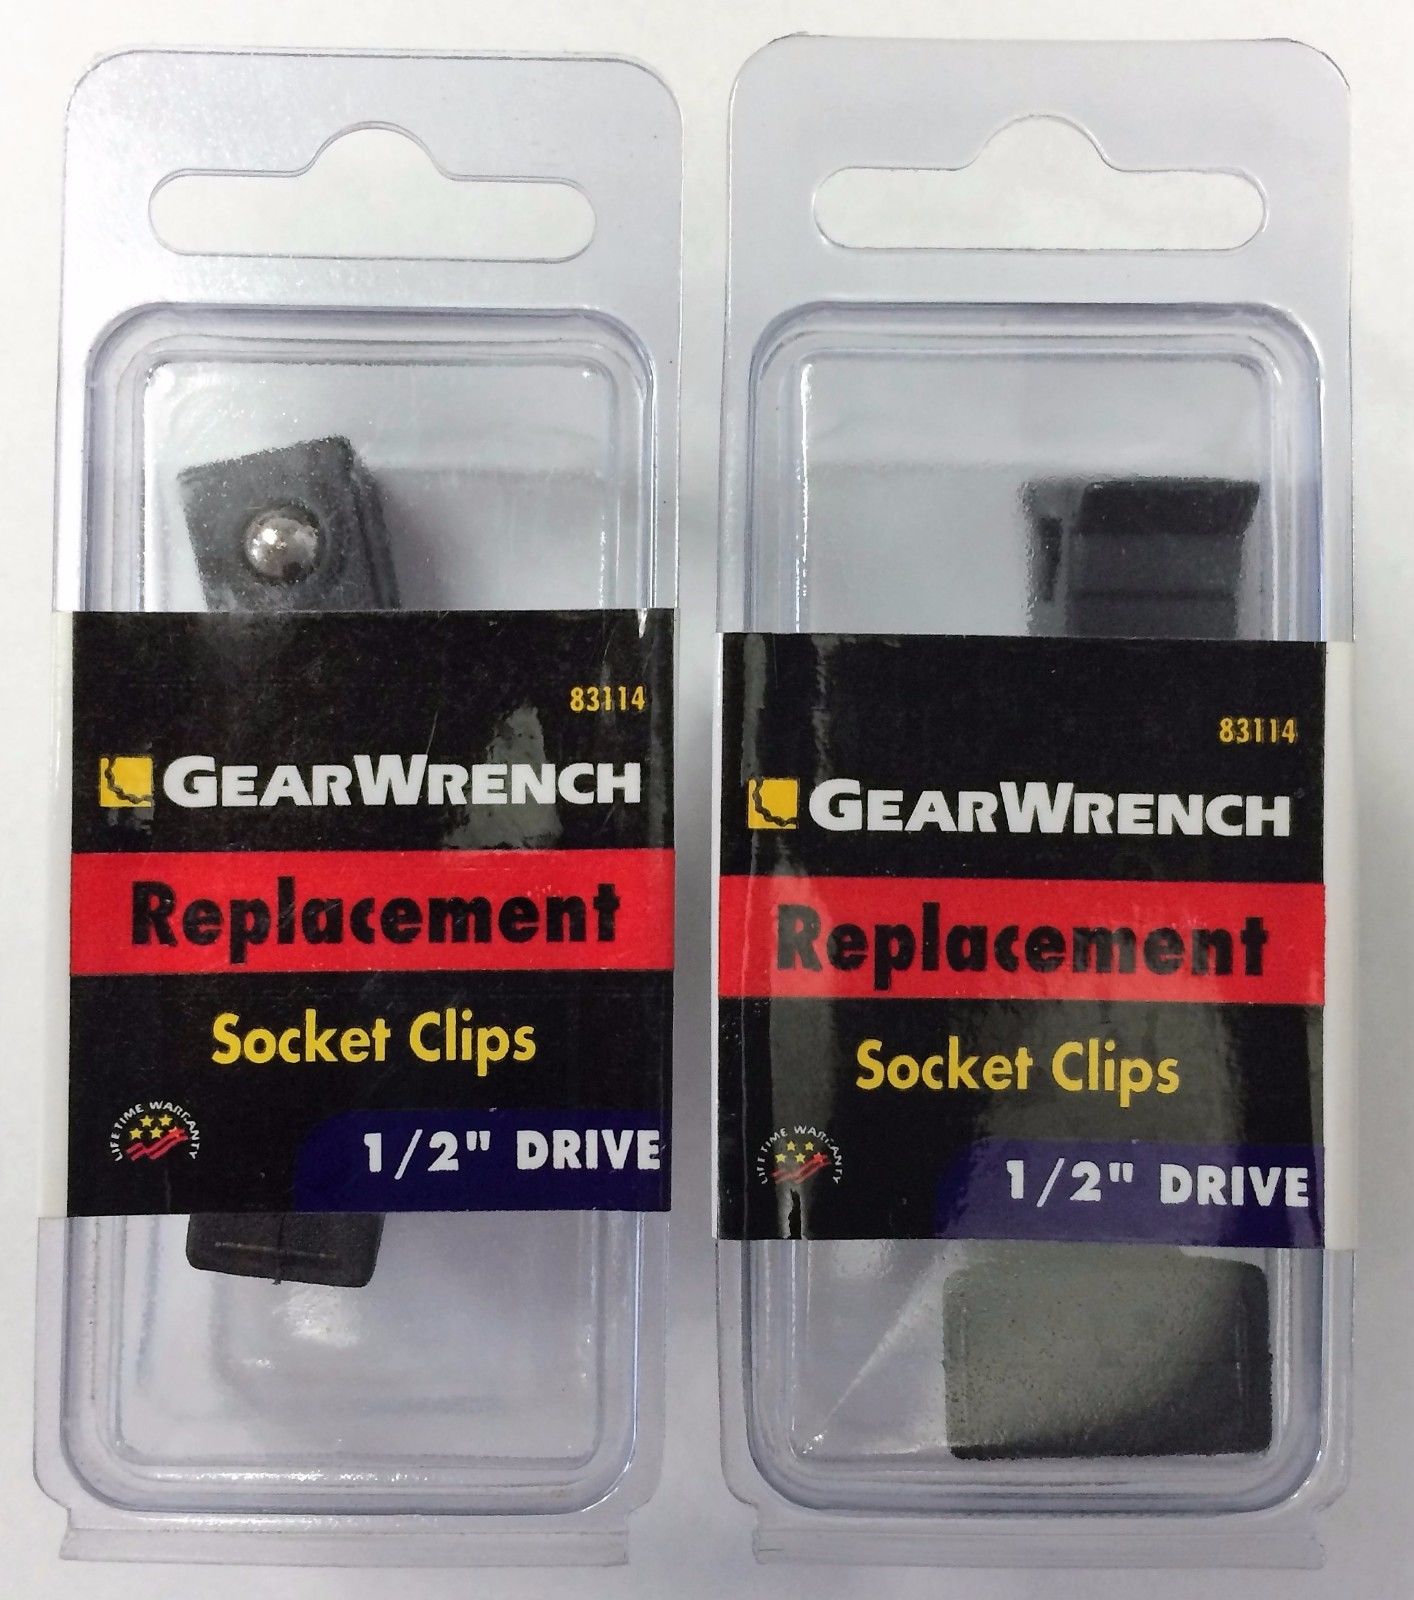 Gearwrench 83114 Replacement Socket Clips 1/2" Drive (2 Packs of 3)